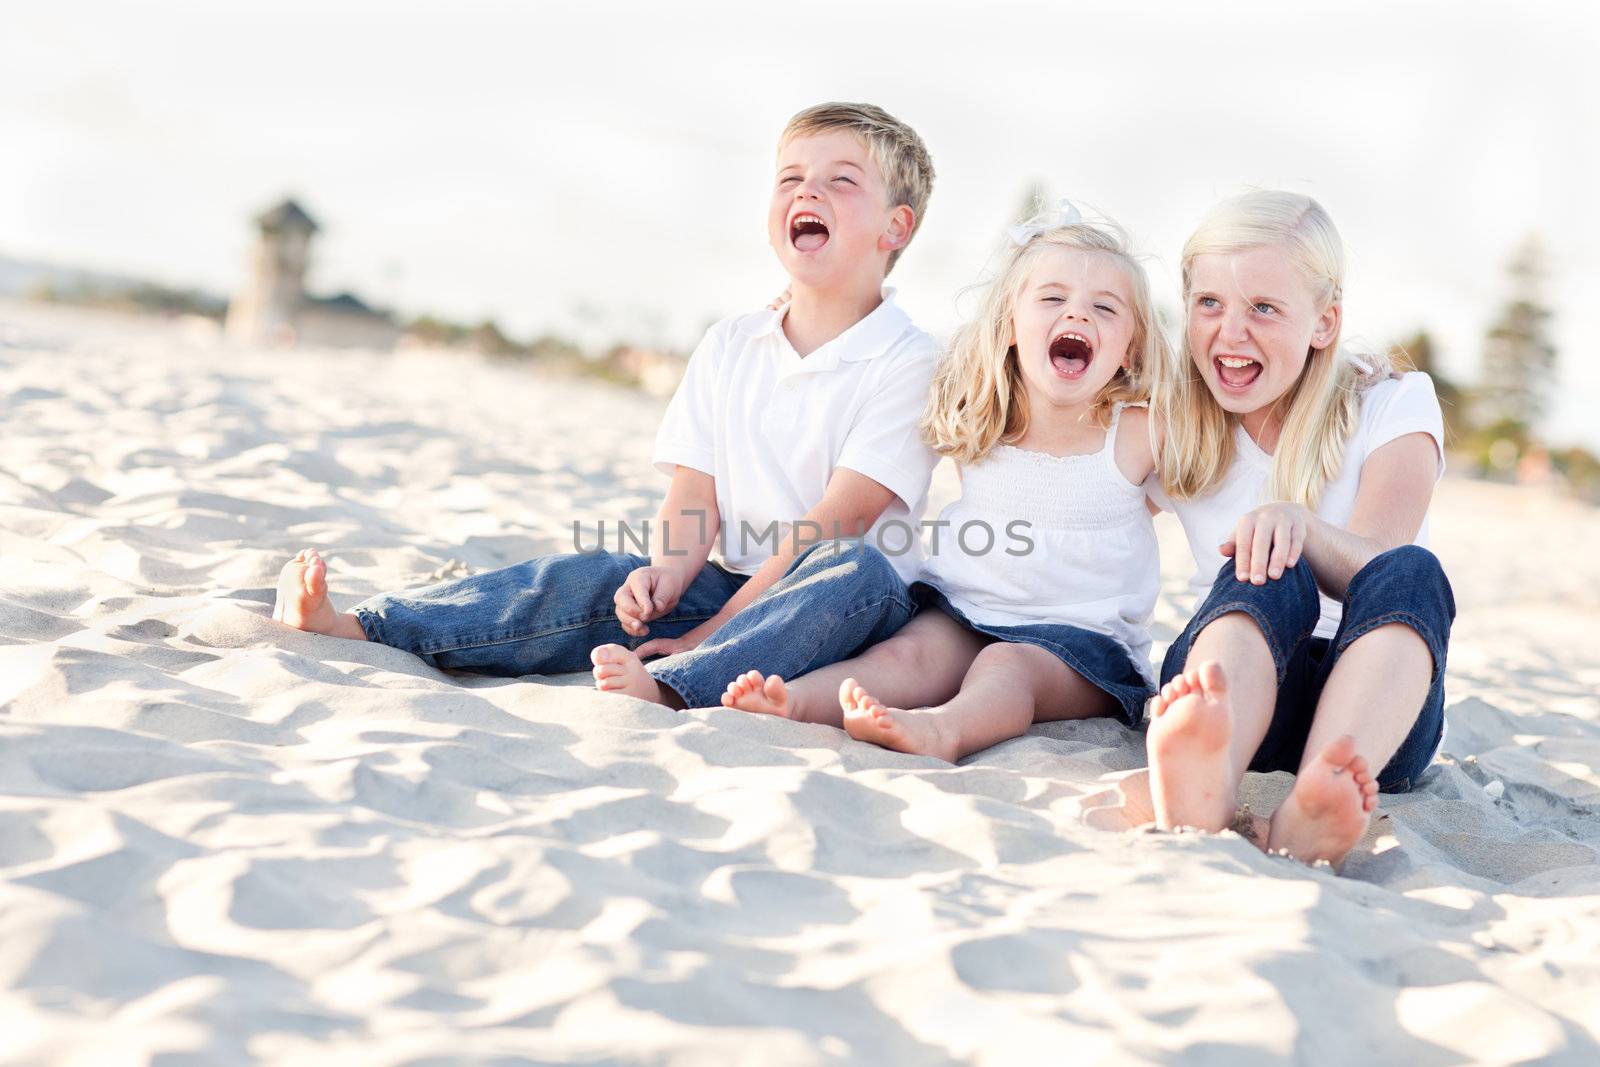 Adorable Sibling Children Portrait at the Beach.